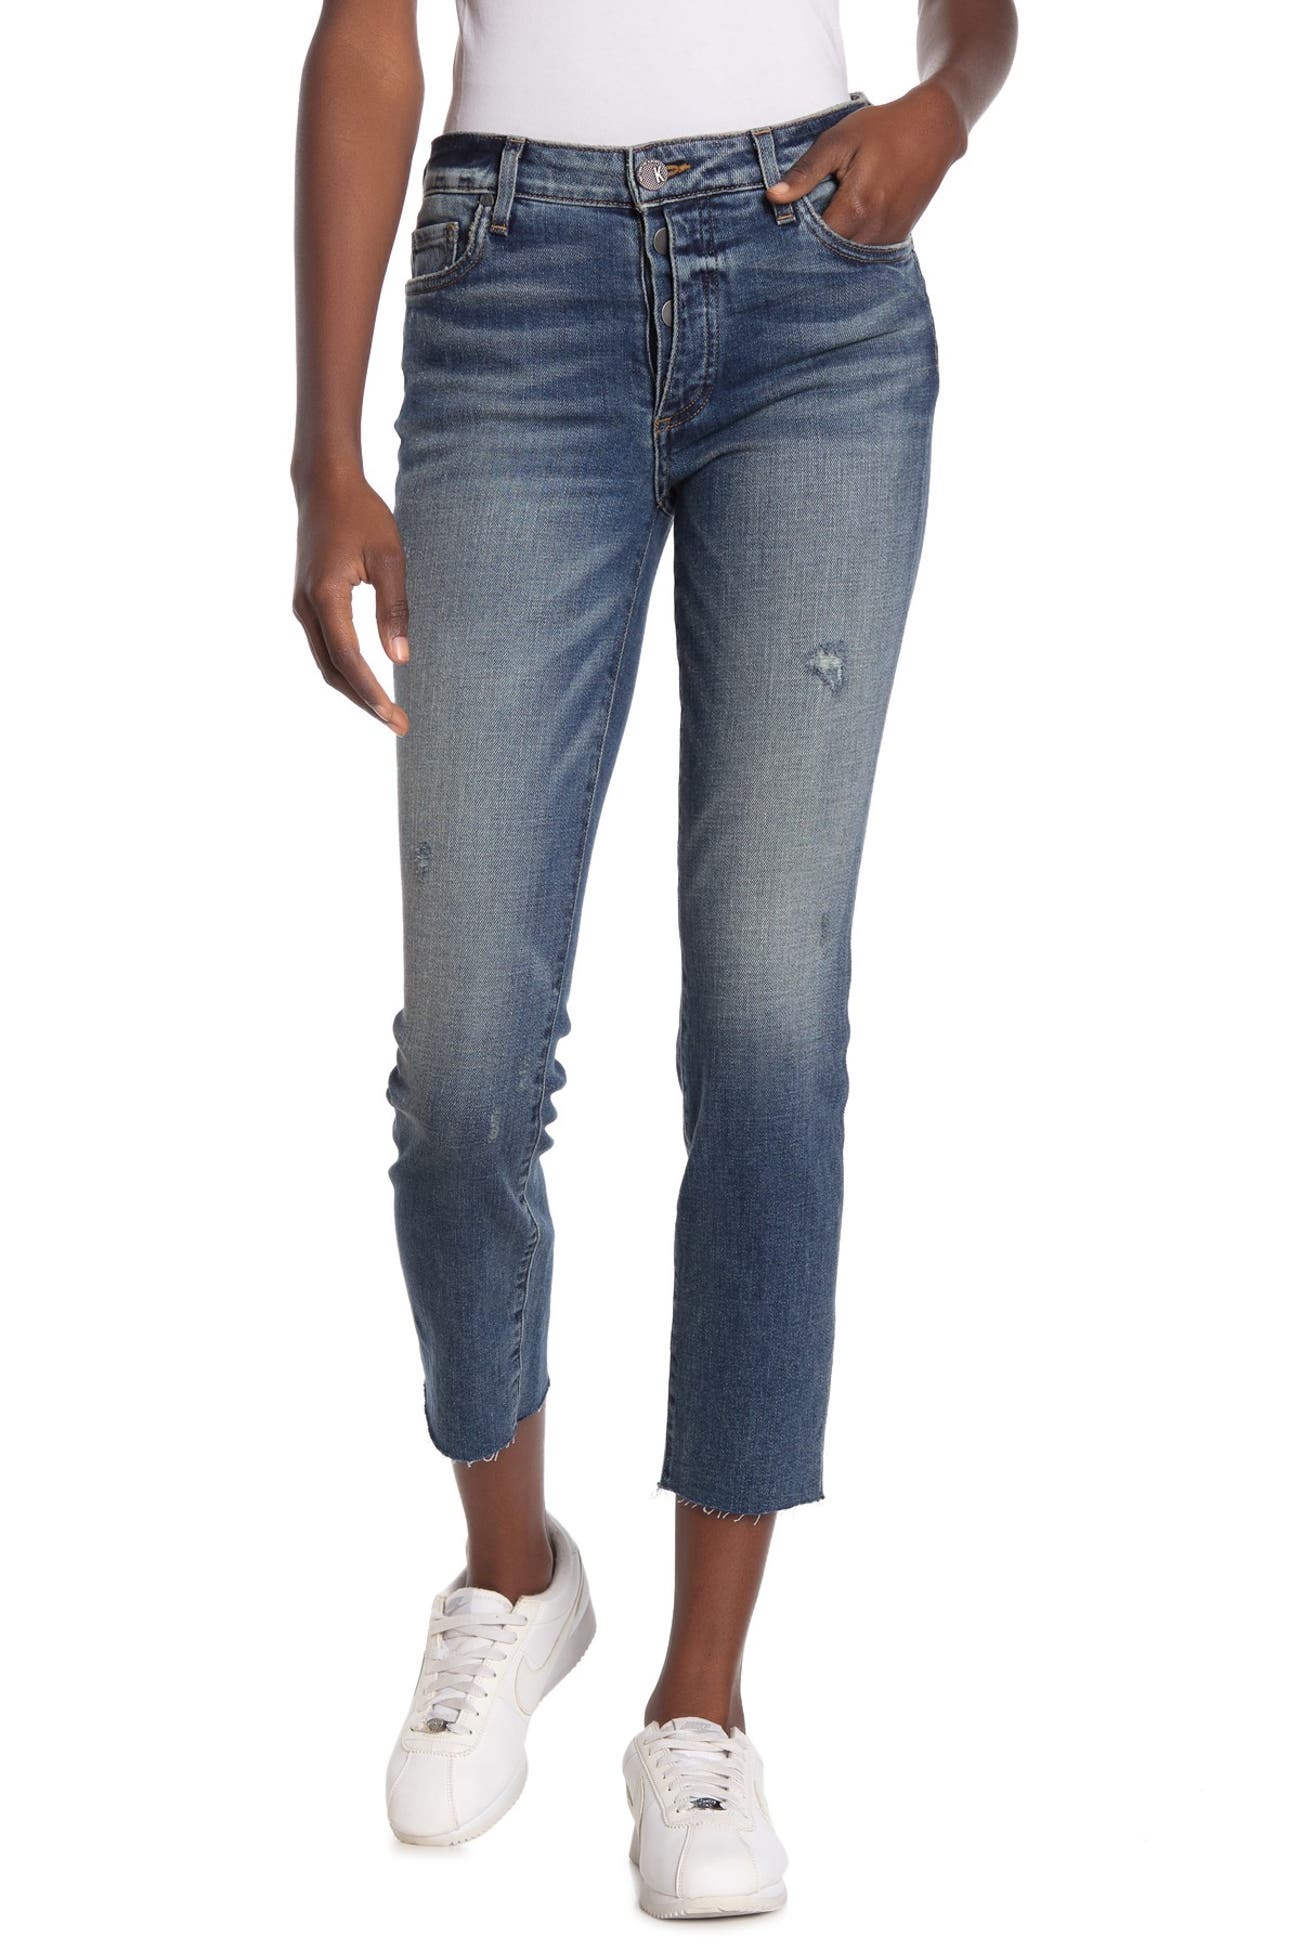 KUT from the Kloth | Reese High Rise Ankle Jeans | Nordstrom Rack